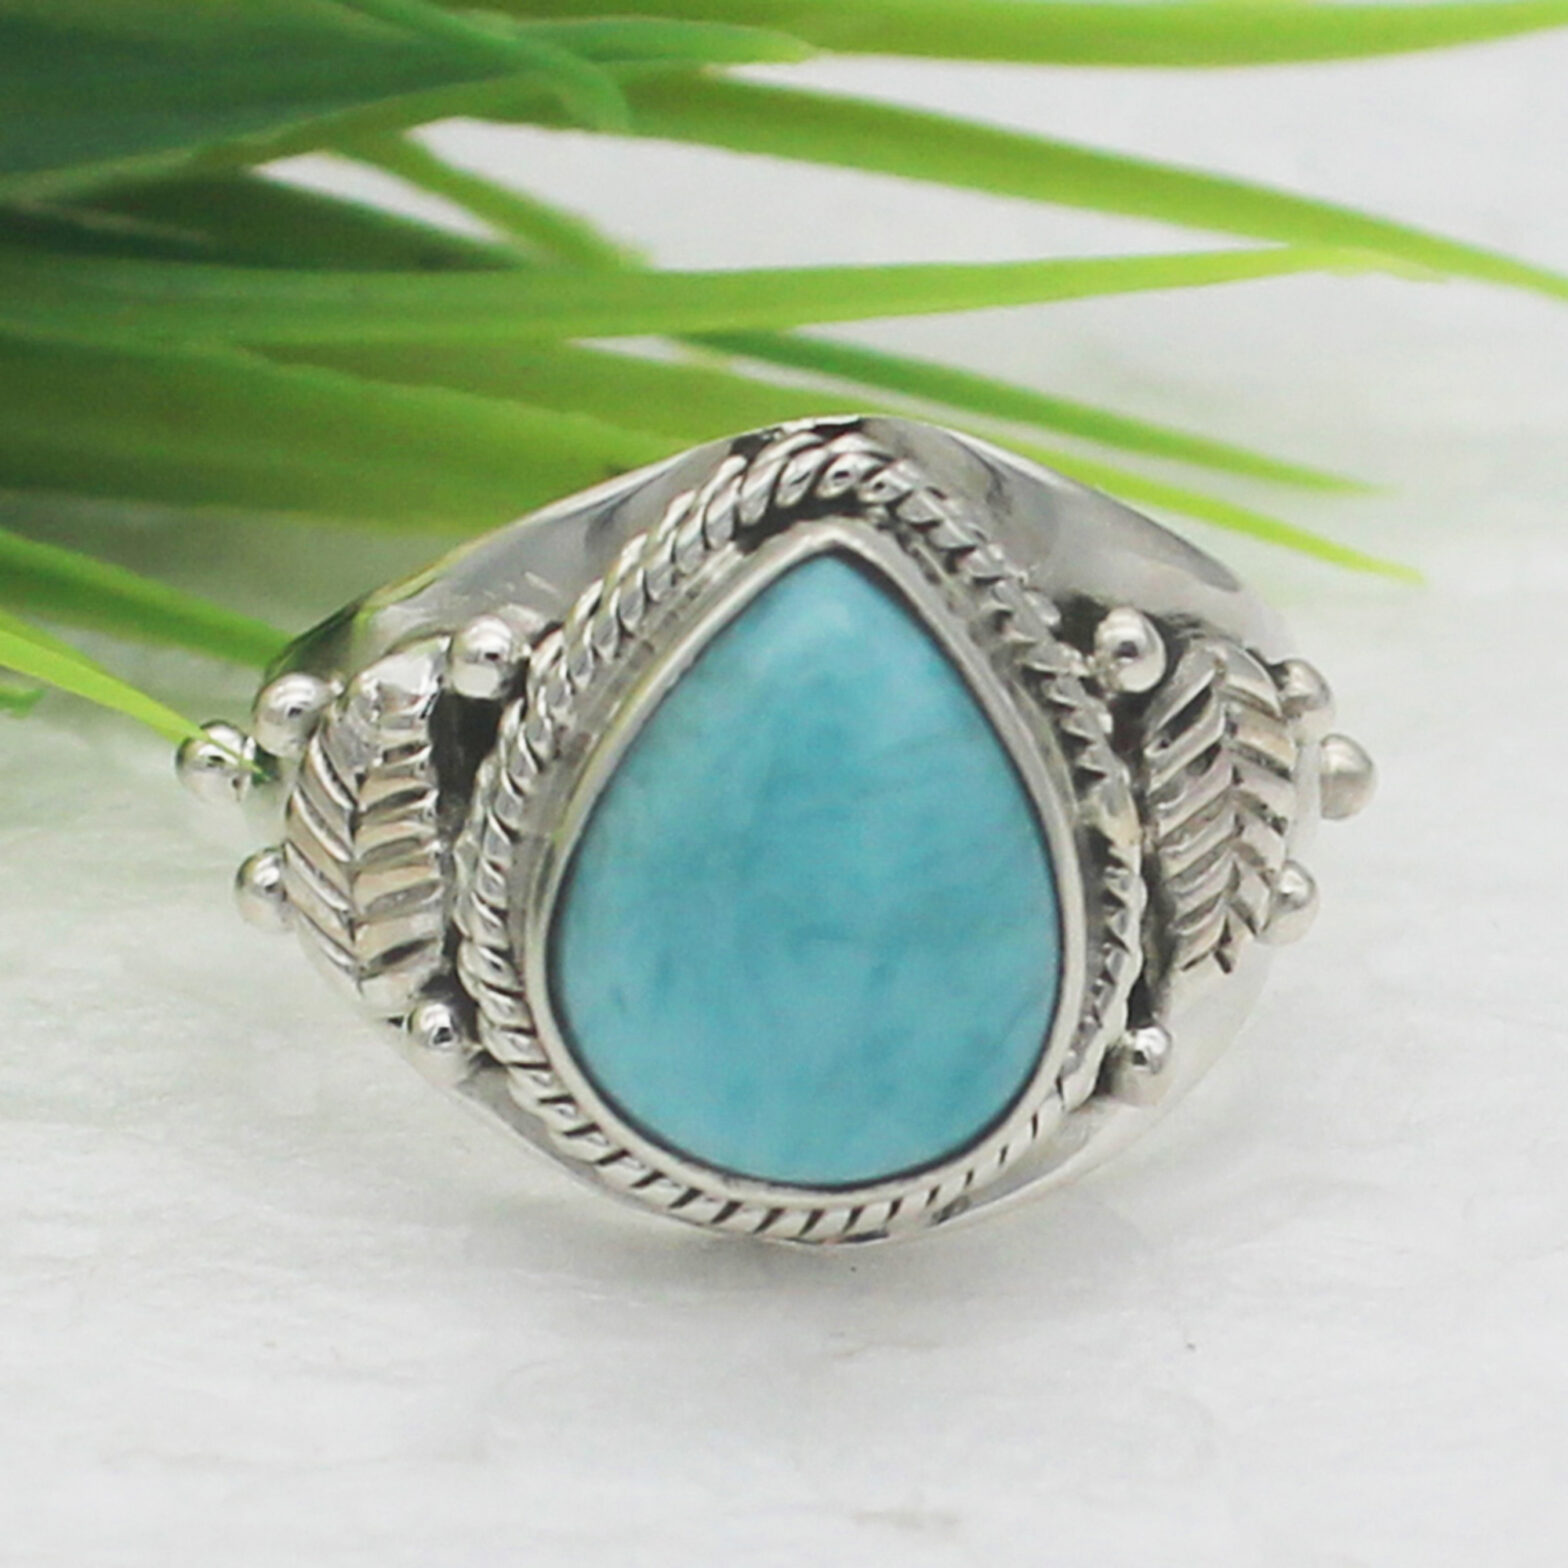 925 Sterling Silver Natural Larimar Ring, Handmade Jewelry, Gemstone Birthstone Ring, Gift For Her